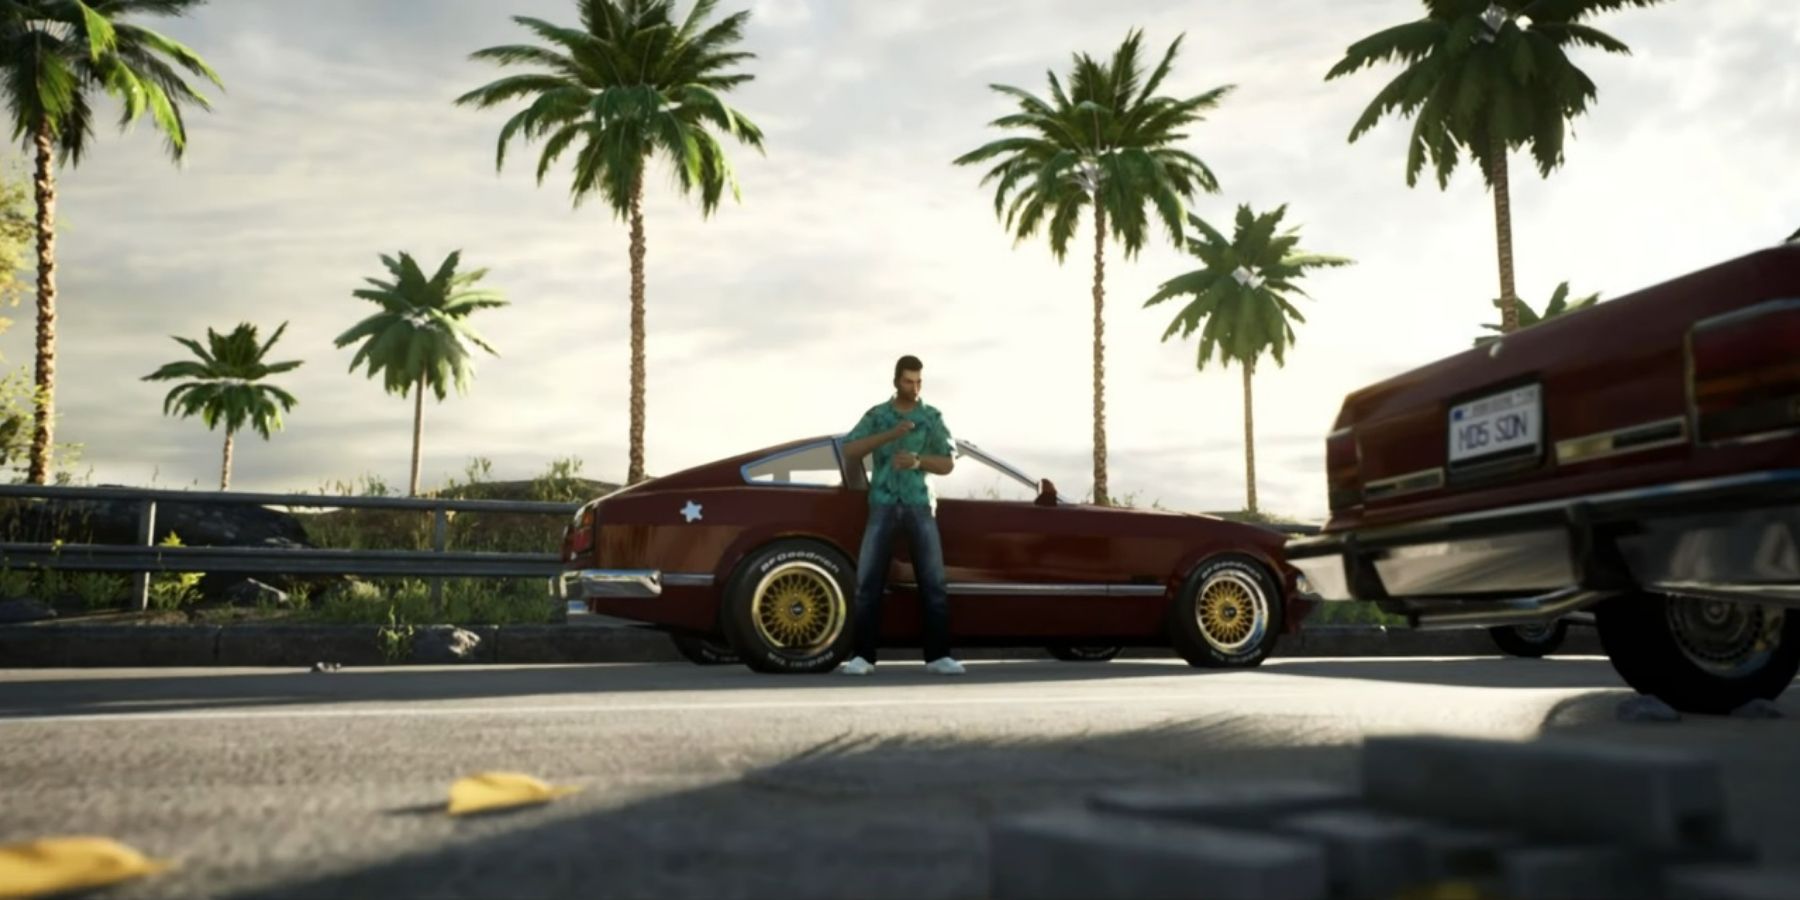 An image from an Unreal Engine 5 reimagining of Grand Theft Auto Vice City showing Tommy leaning against a car.